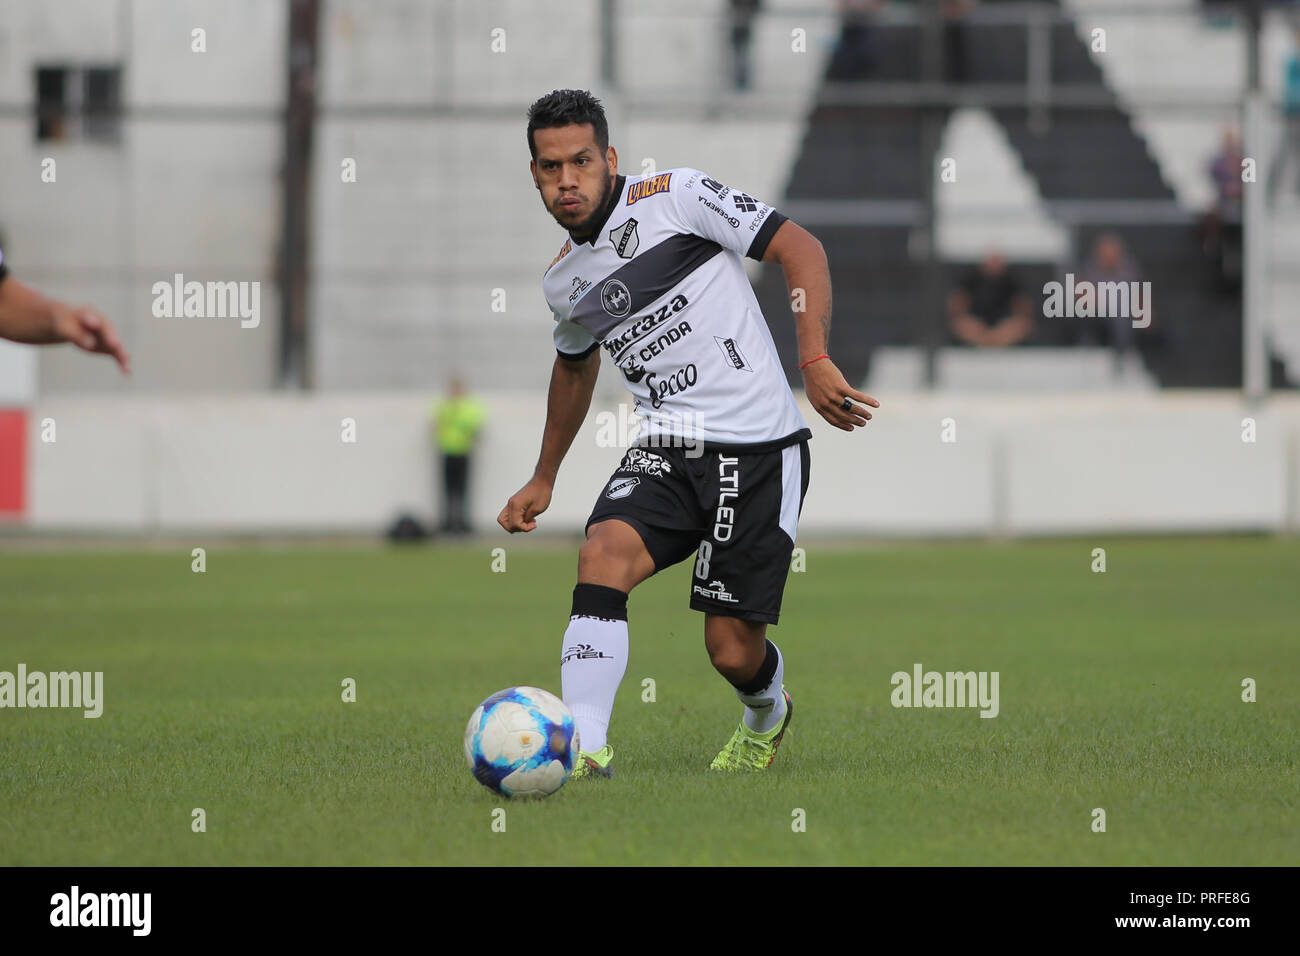 The football player, Hugo Soria, stands with the ball during a football match of the argentinian league in Buenos Aires, 30 of april of 2018 Stock Photo